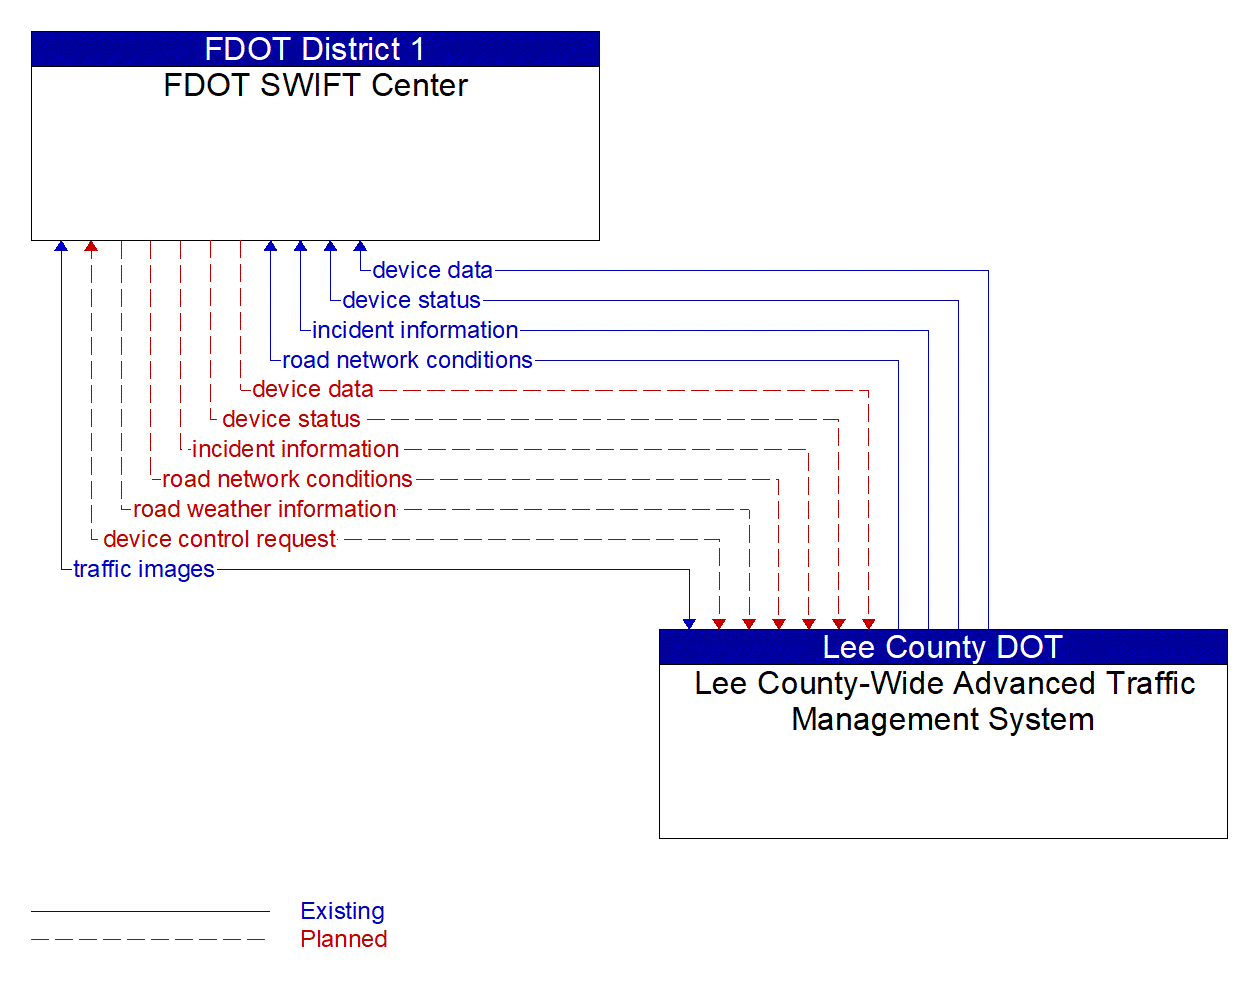 Architecture Flow Diagram: Lee County-Wide Advanced Traffic Management System <--> FDOT SWIFT Center